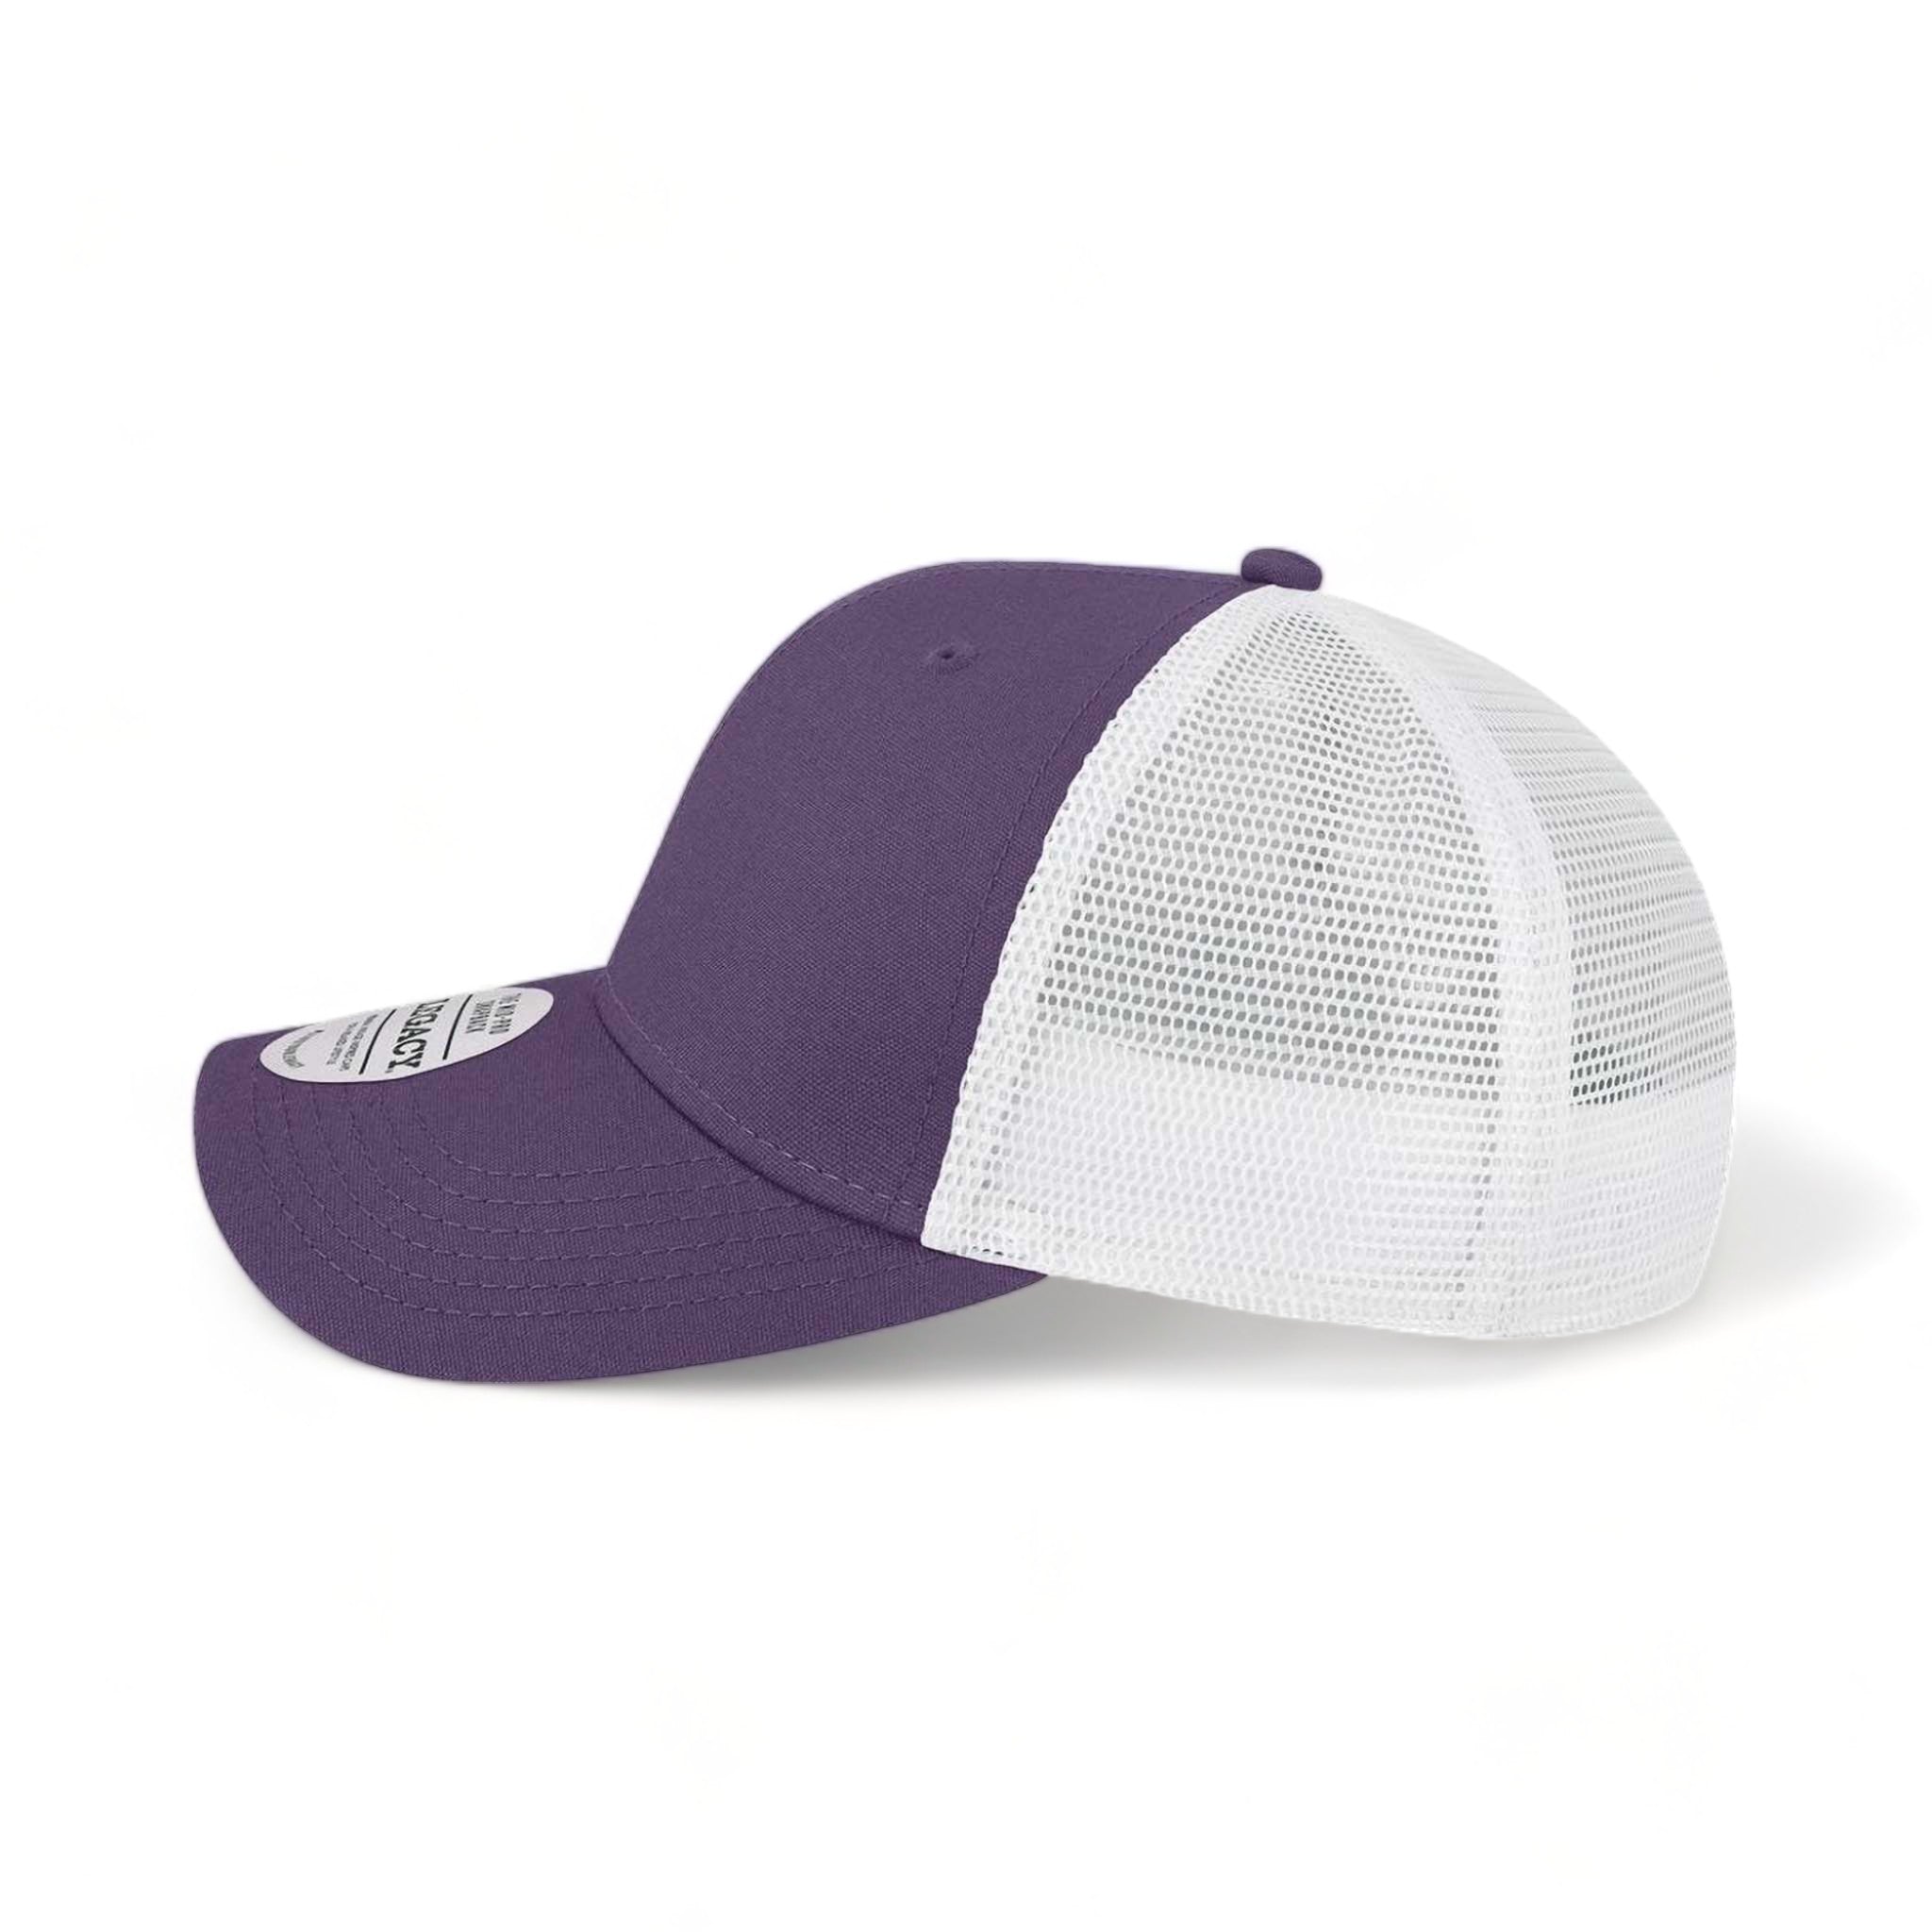 Side view of LEGACY MPS custom hat in purple and white